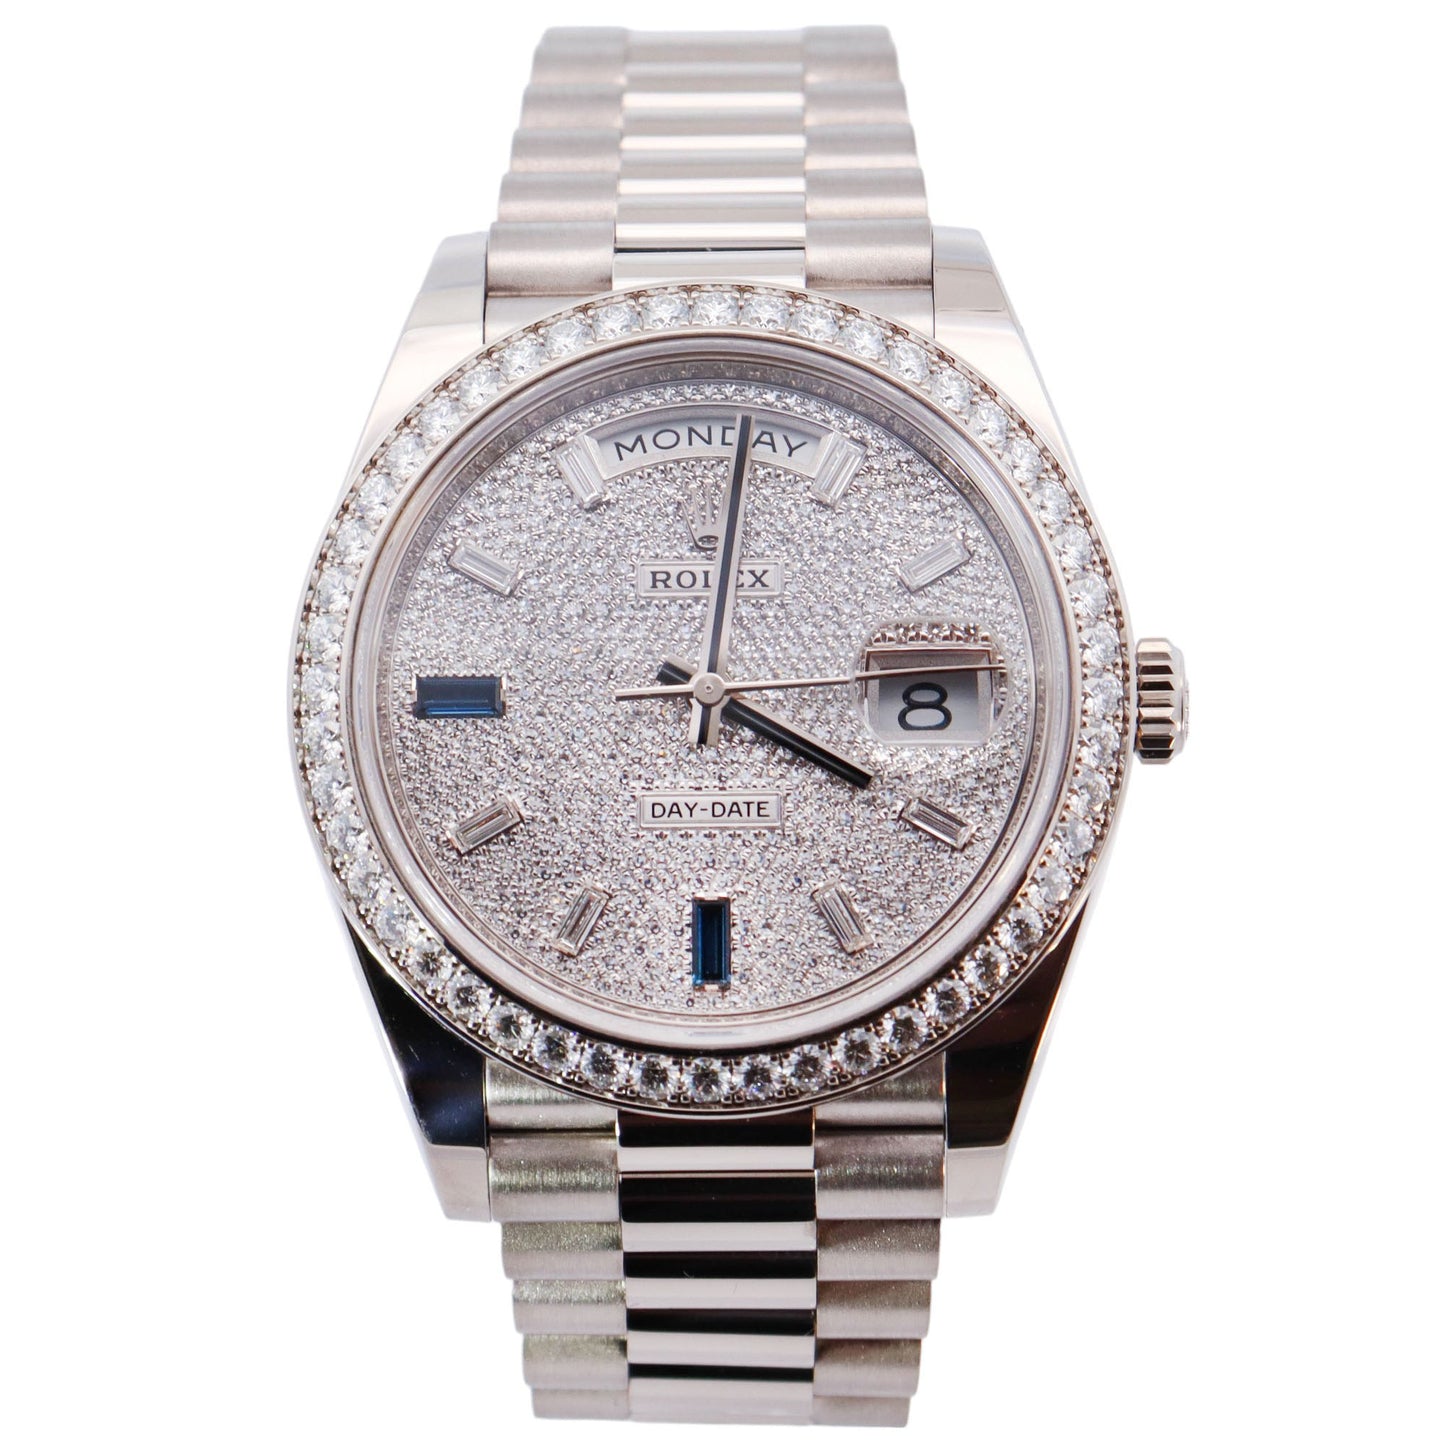 Rolex Day-Date White Gold 40mm Factory Diamond Bezel Pave Sapphire Dial Watch Reference# 228349RBR - Happy Jewelers Fine Jewelry Lifetime Warranty